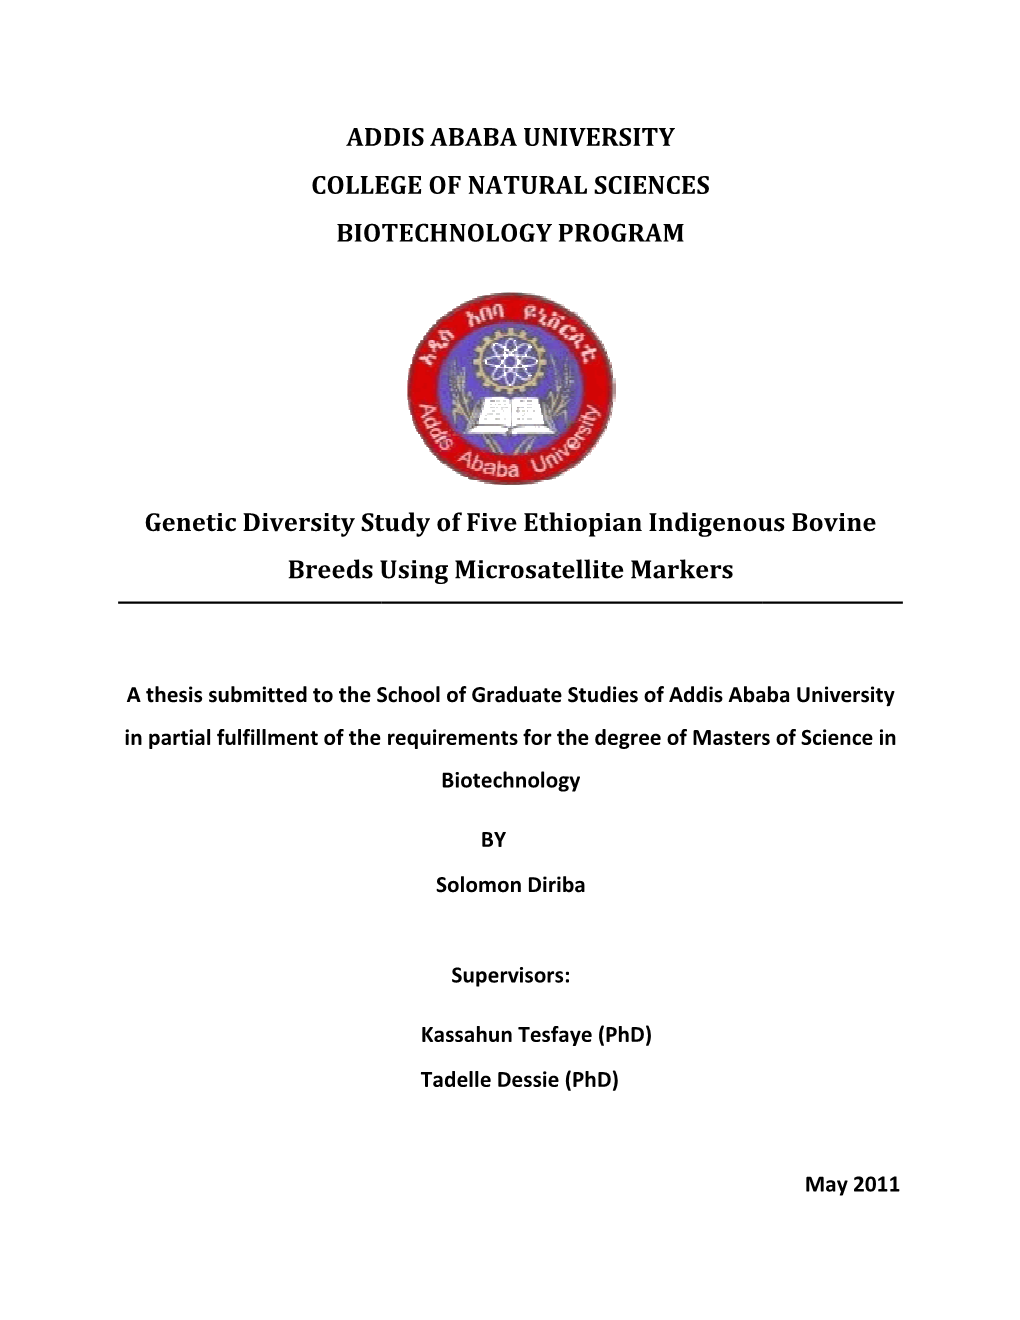 ADDIS ABABA COLLEGE of NAT BIOTECHNOLO Genetic Diversity Study Breeds Using Micro ADDIS ABABA UNIVERSITY COLLEGE of NATURAL SCIE